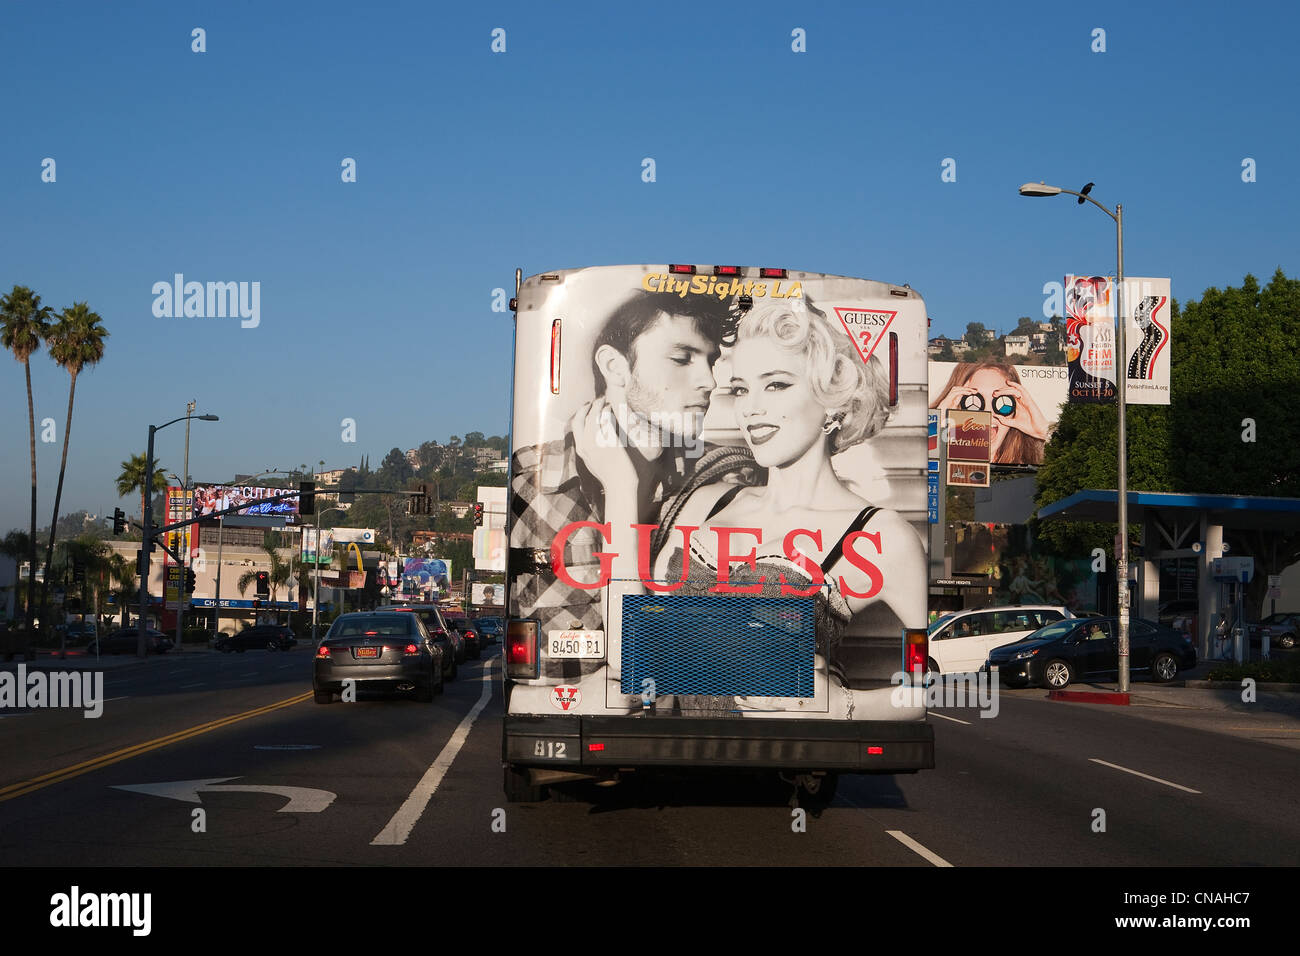 United States, California, Los Angeles, Hollywood, bus sur Sunset Boulevard Banque D'Images